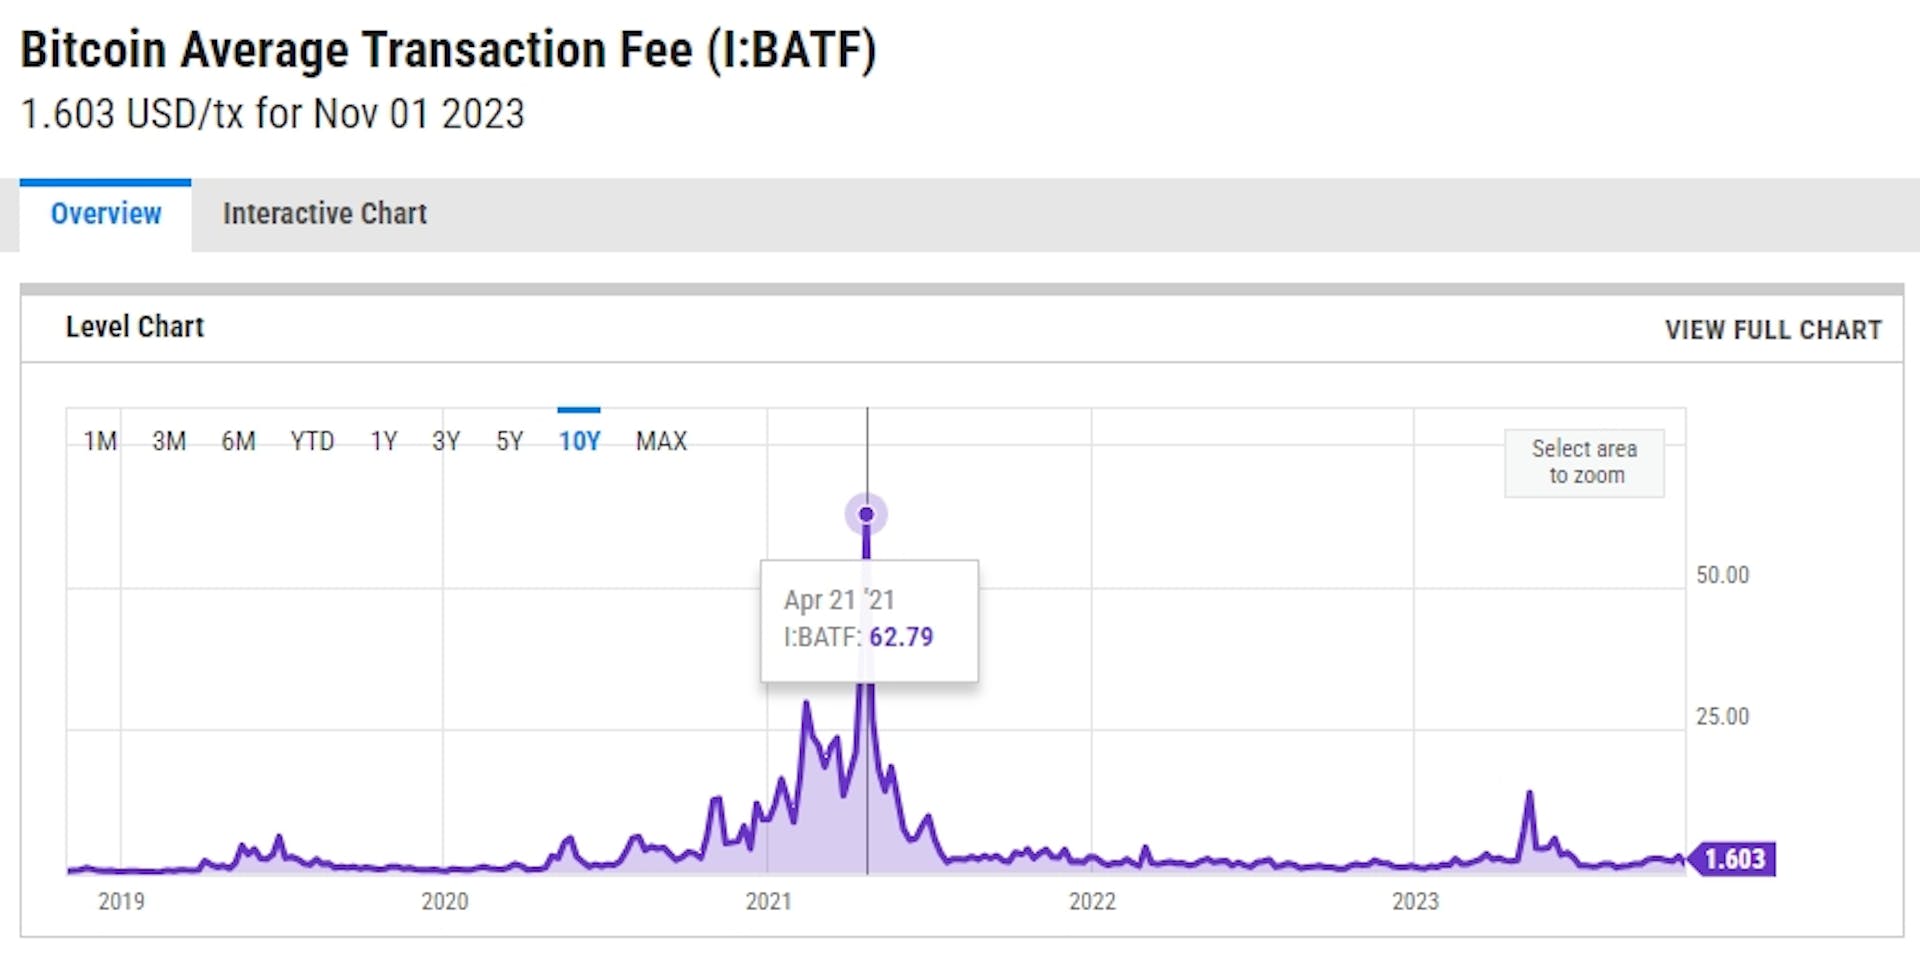 Bitcoin average transaction fee (with maximum in 2021). Image by YCharts